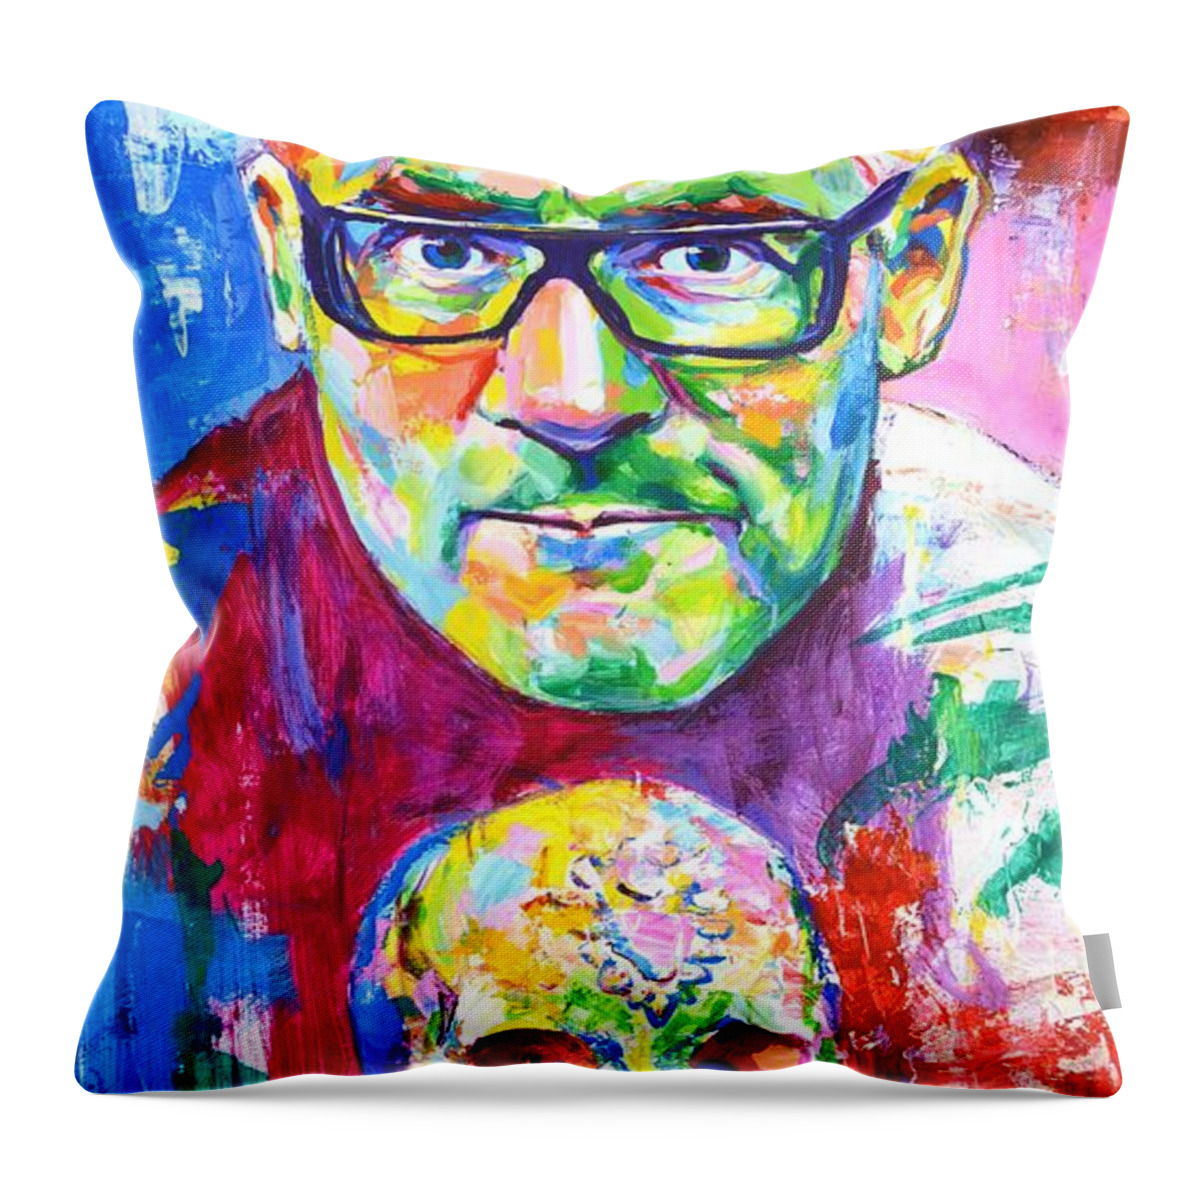 Damien Stephen Hirst Throw Pillow featuring the painting Damien Stephen Hirst by Iryna Kastsova